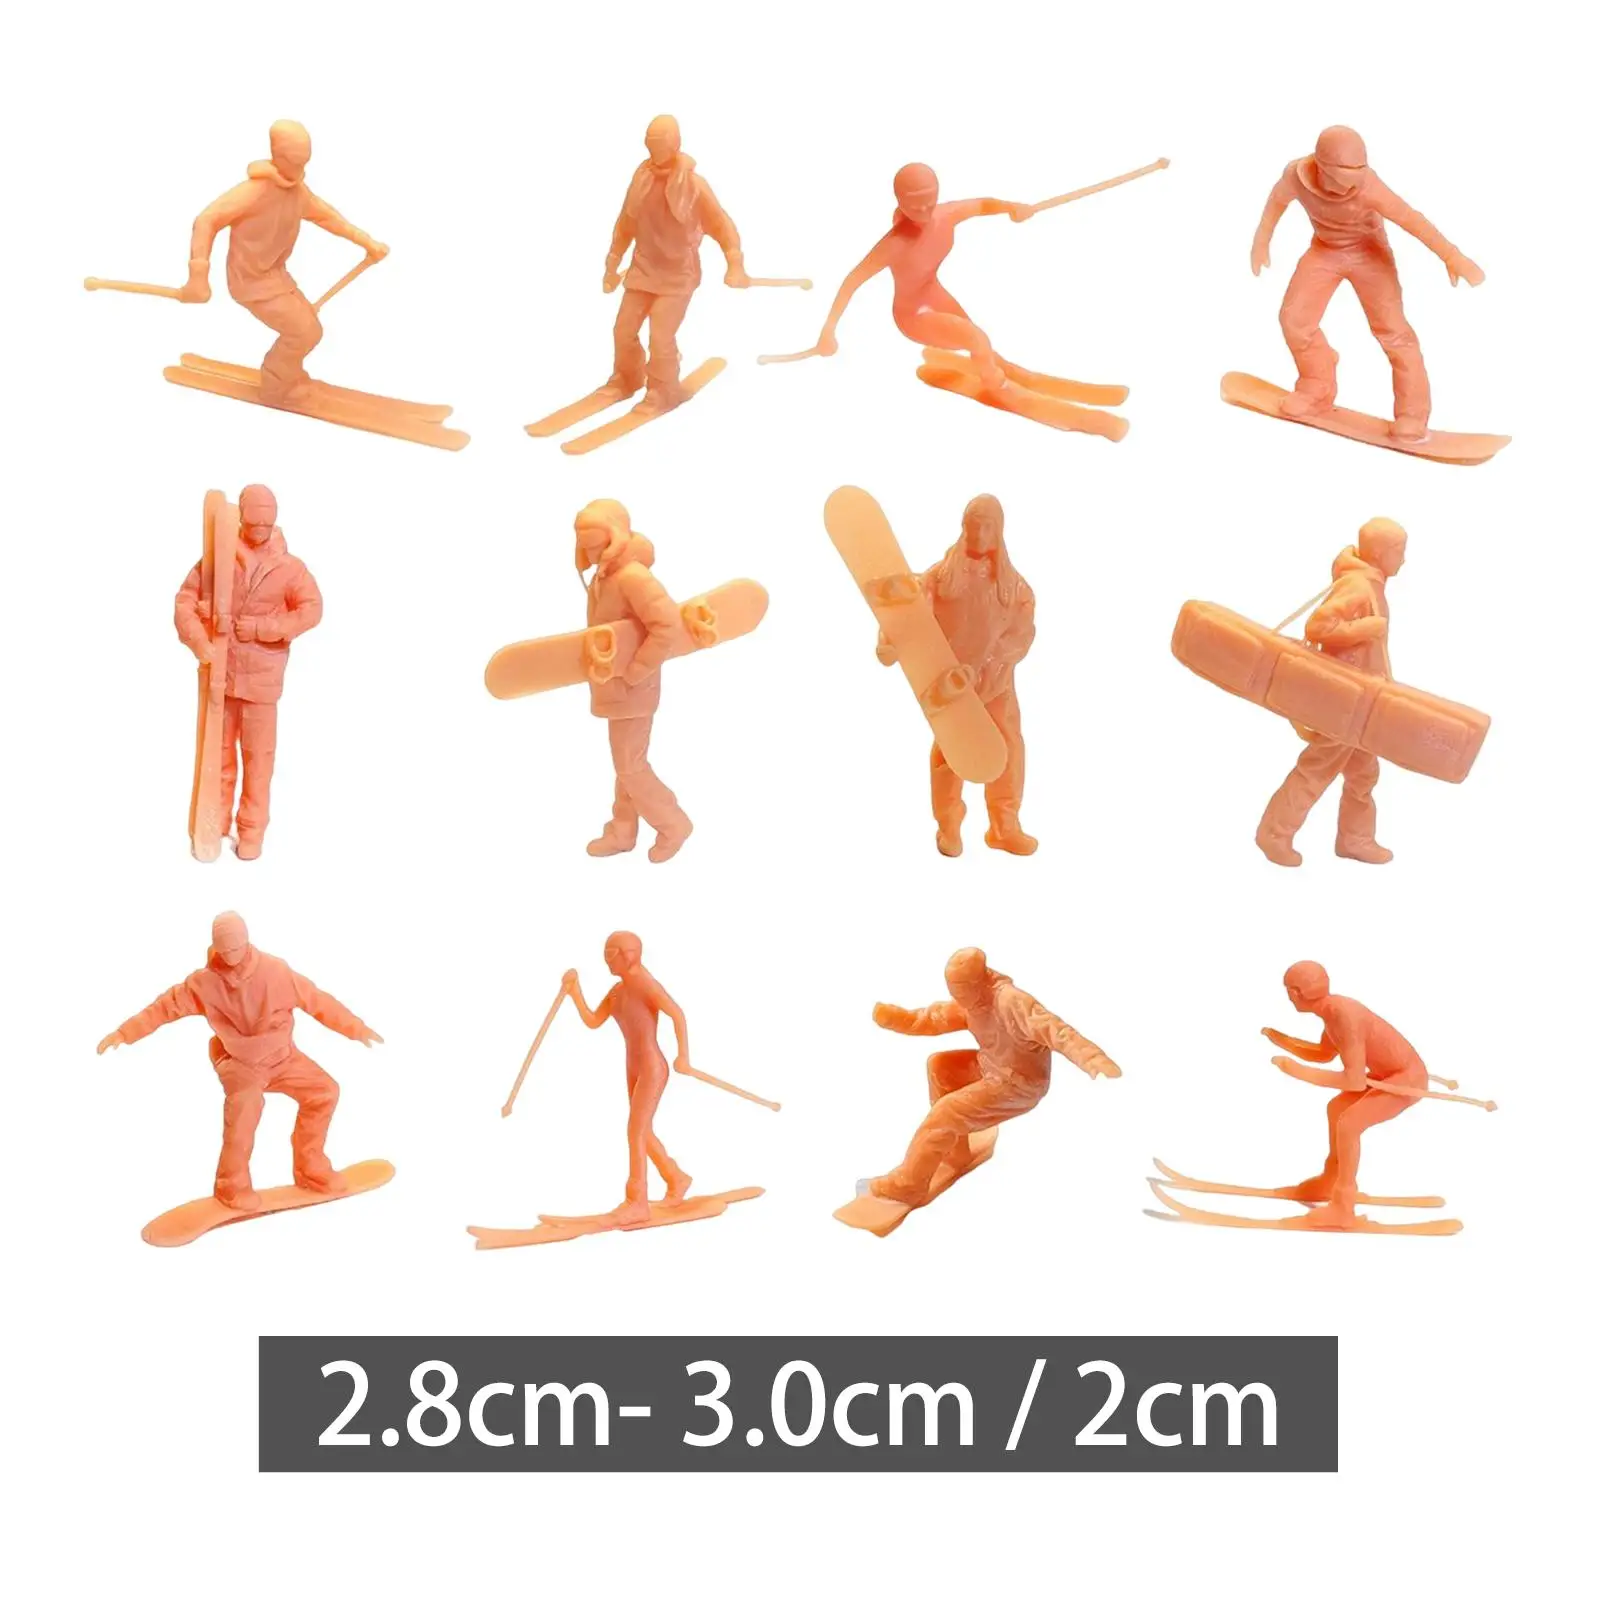 Simulation Skiing Figures Small Statue Fairy Garden Toy for DIY Miniatures Sand Table Layout Diorama Train Scenery Decoration